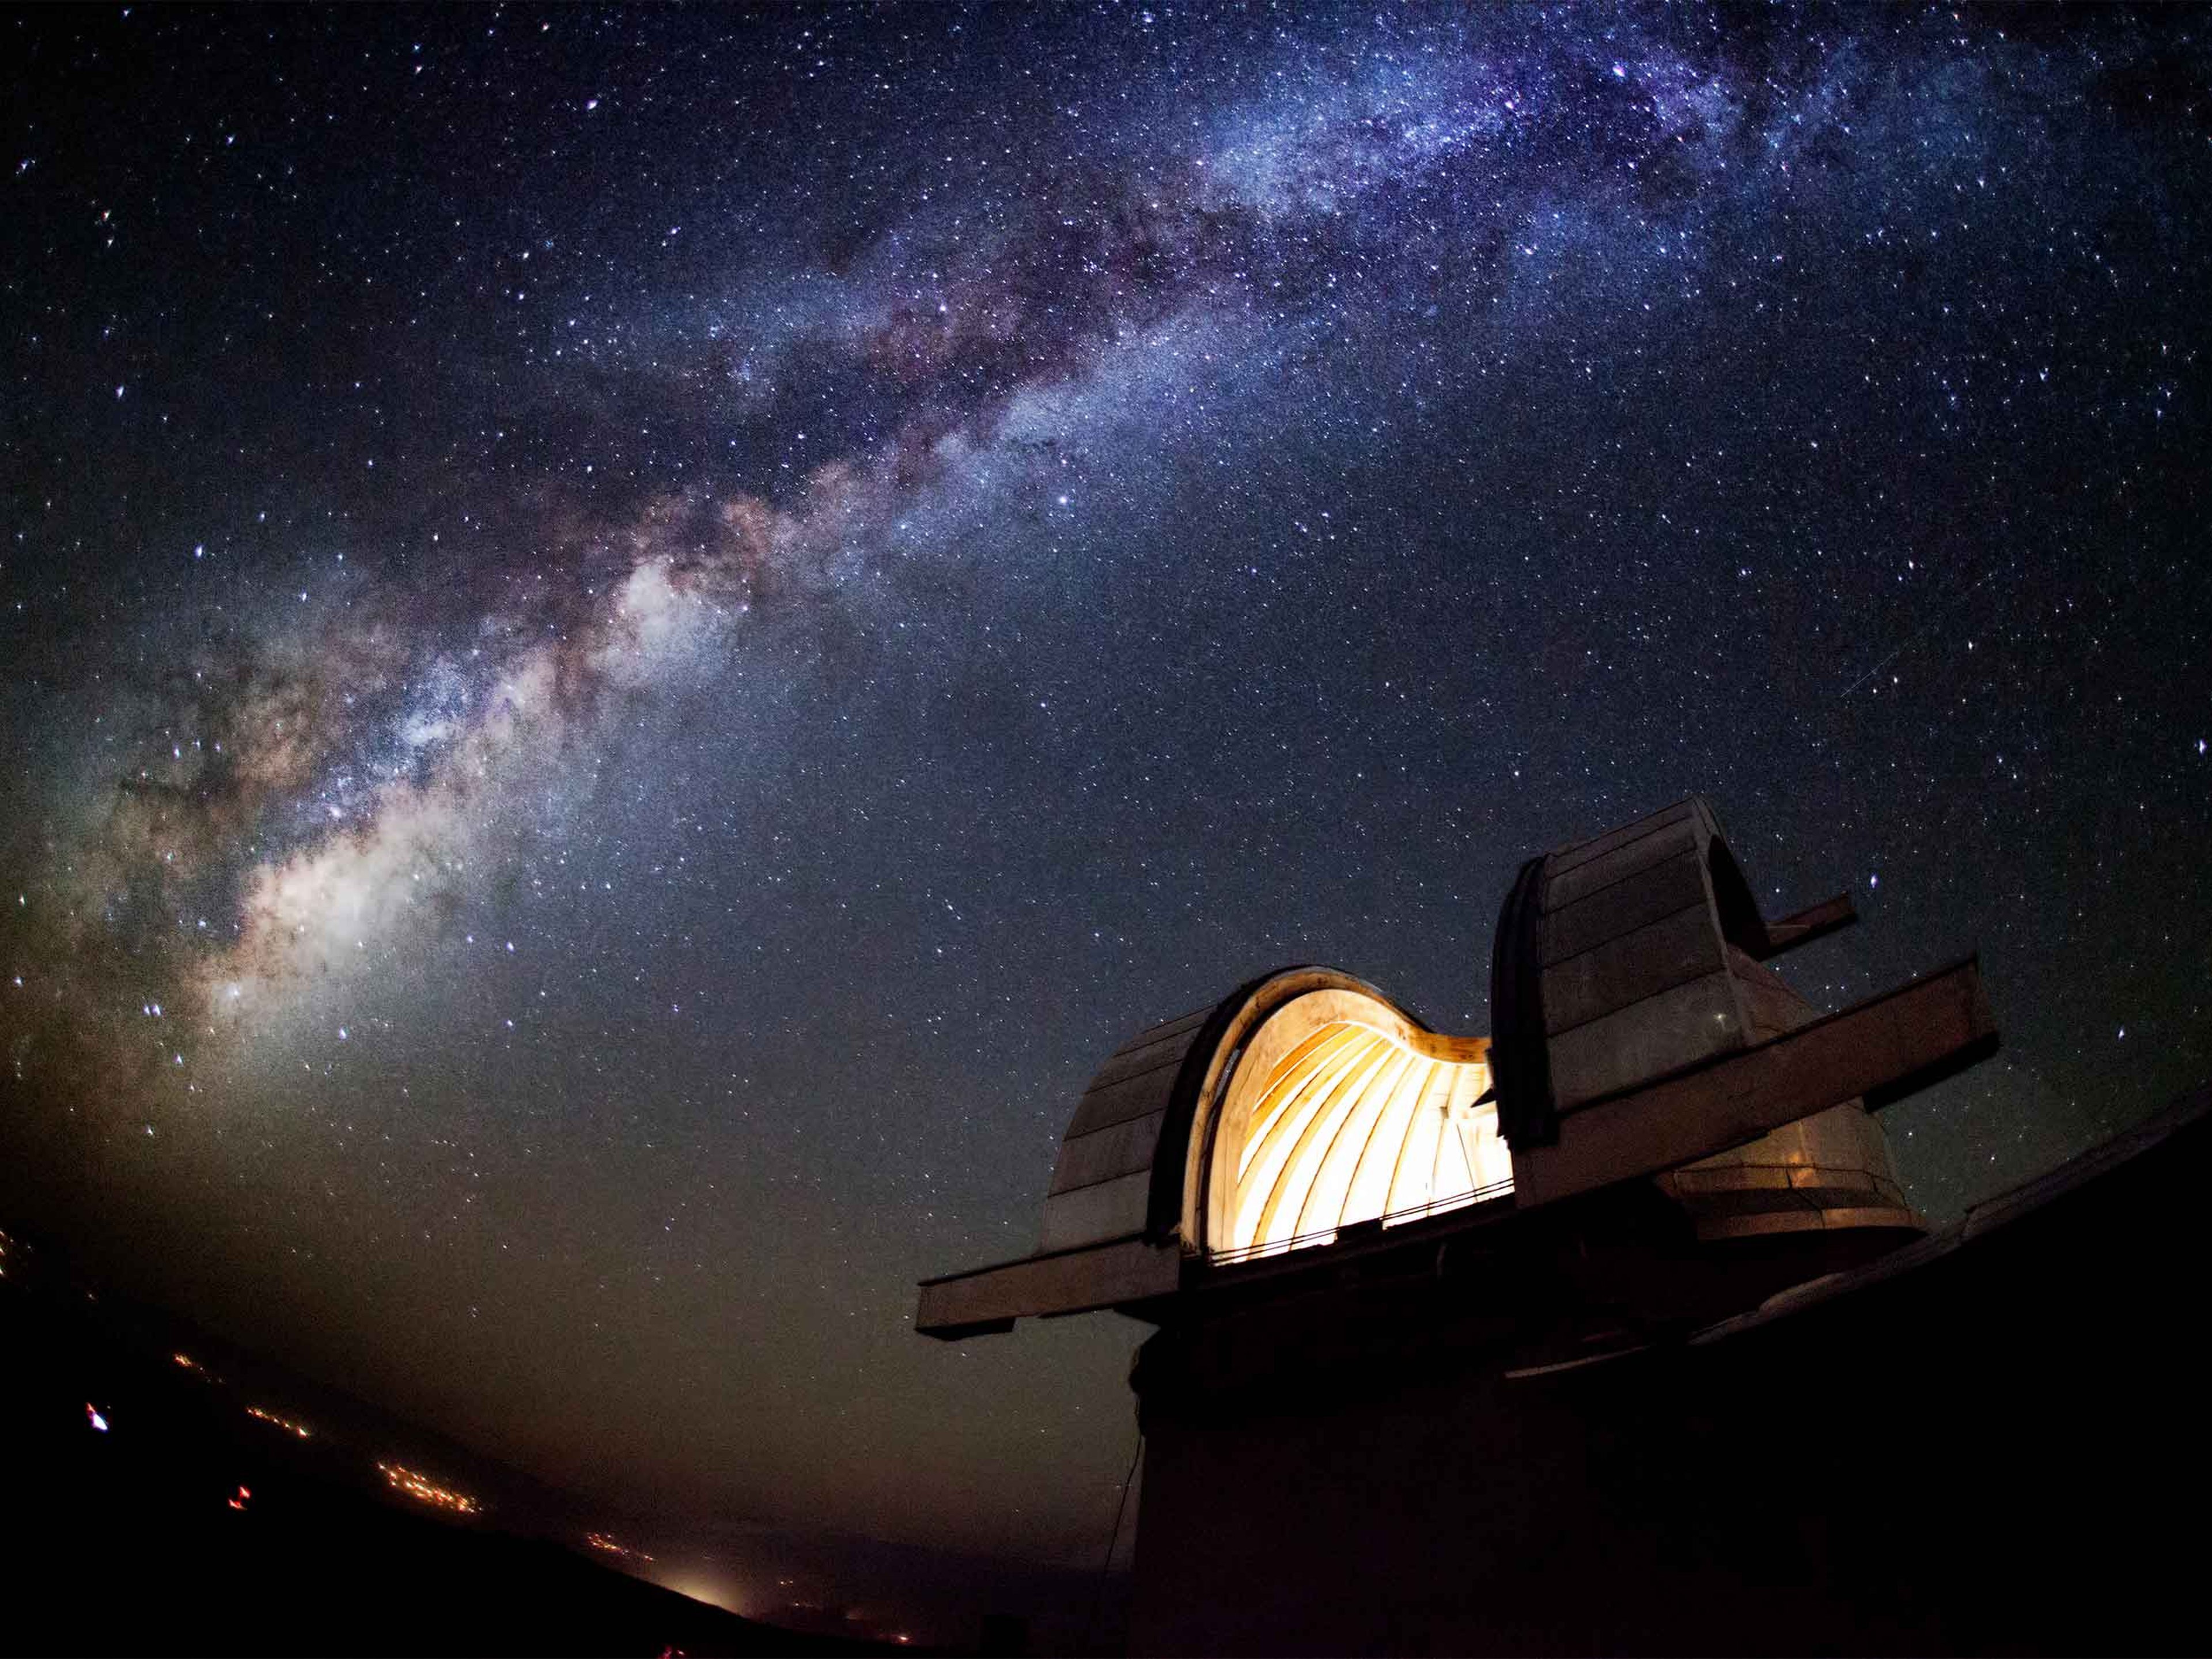 Astronomical Observatory under the starlit sky filled with the milky way.